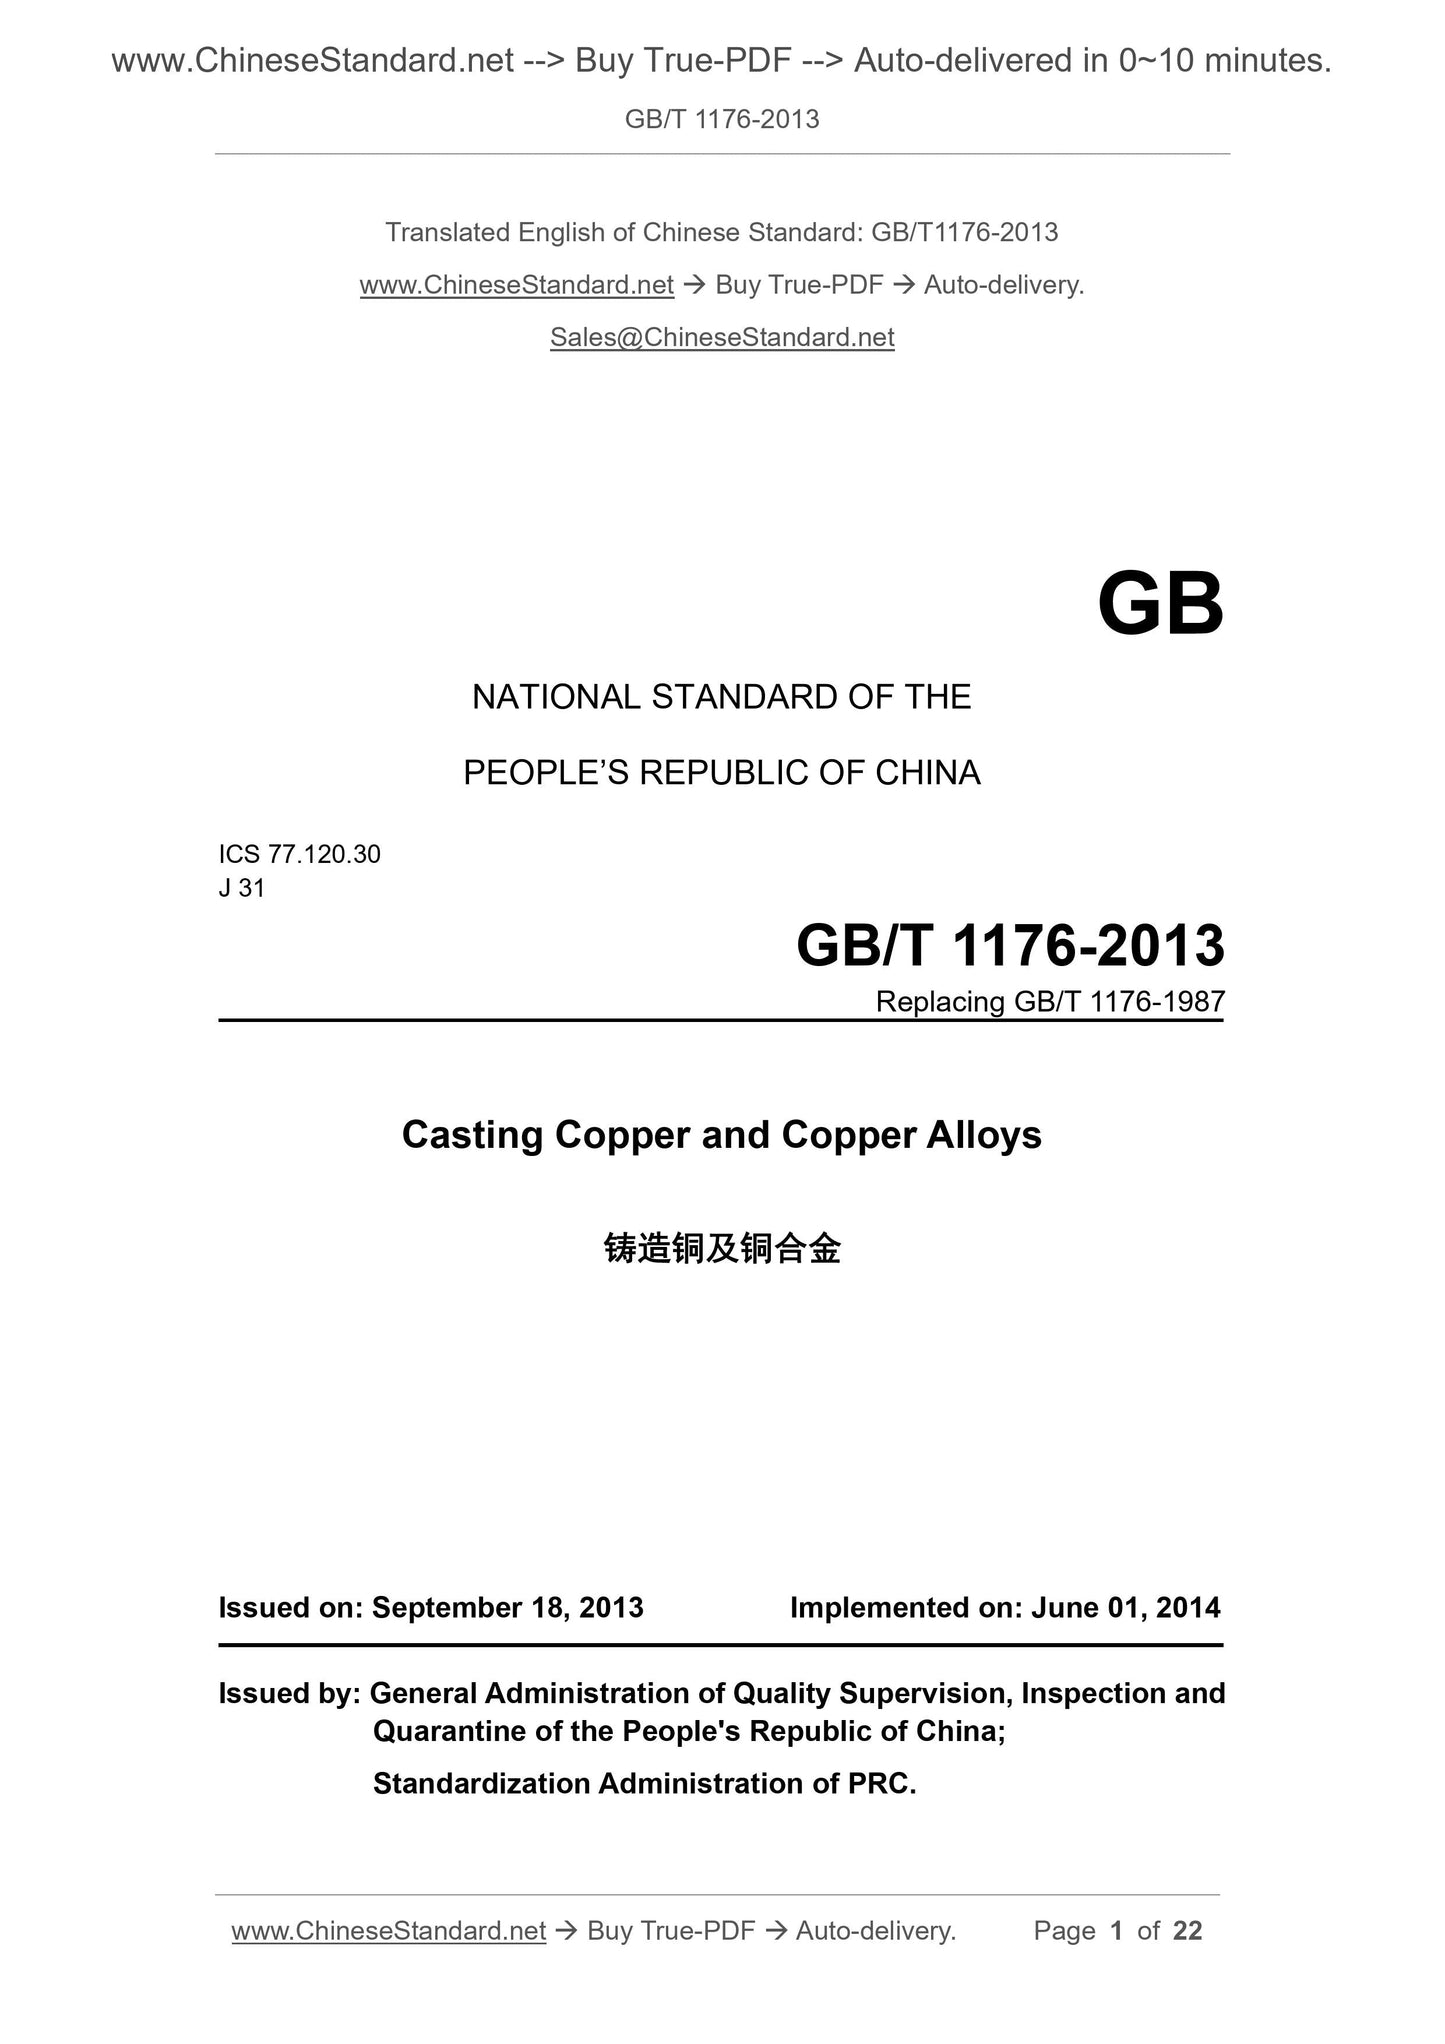 GB/T 1176-2013 Page 1